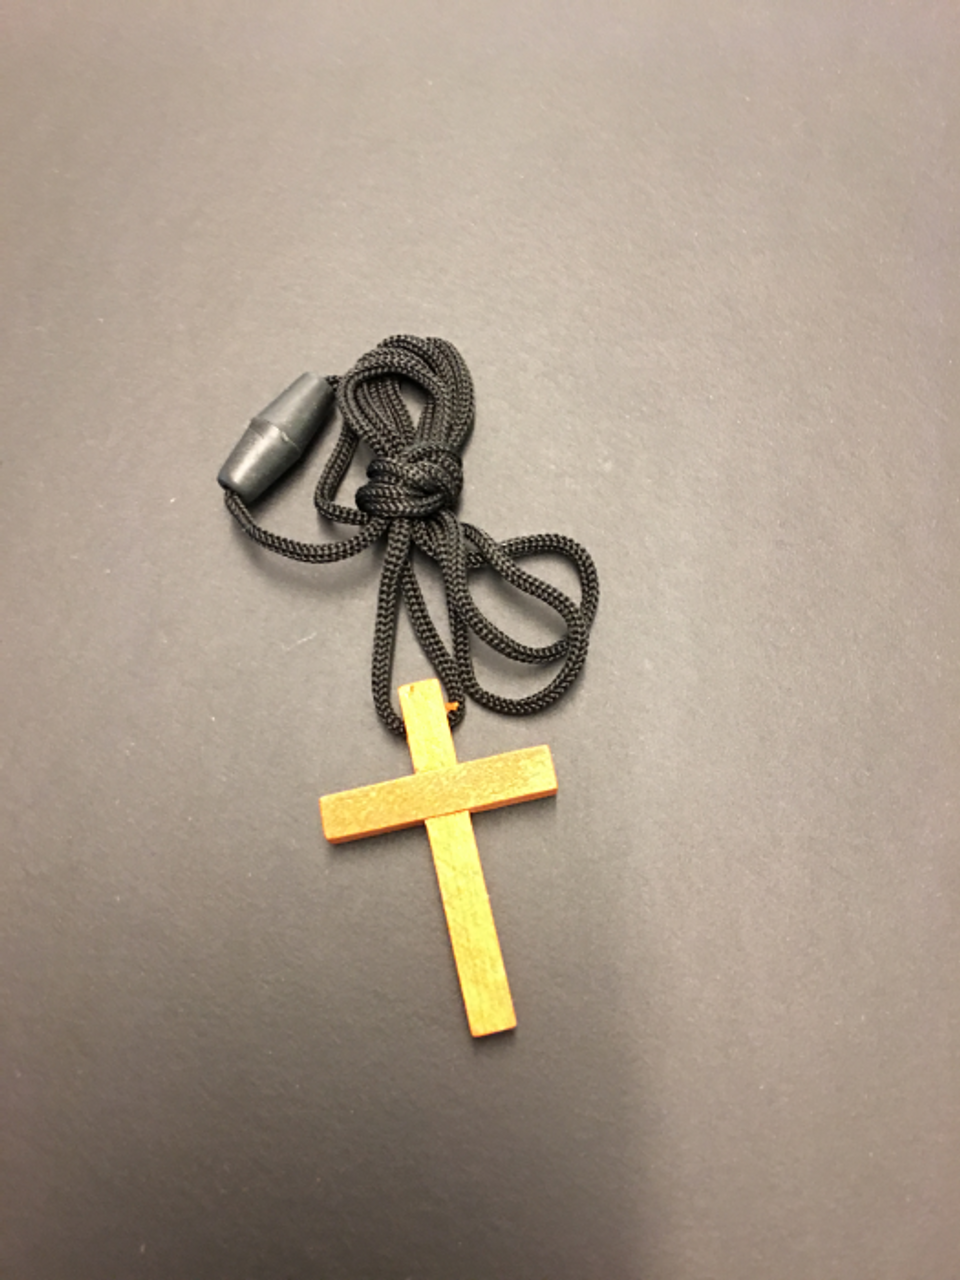 2 Sided Wooden Cross Pendant on Rope - at Holy Trinity Store